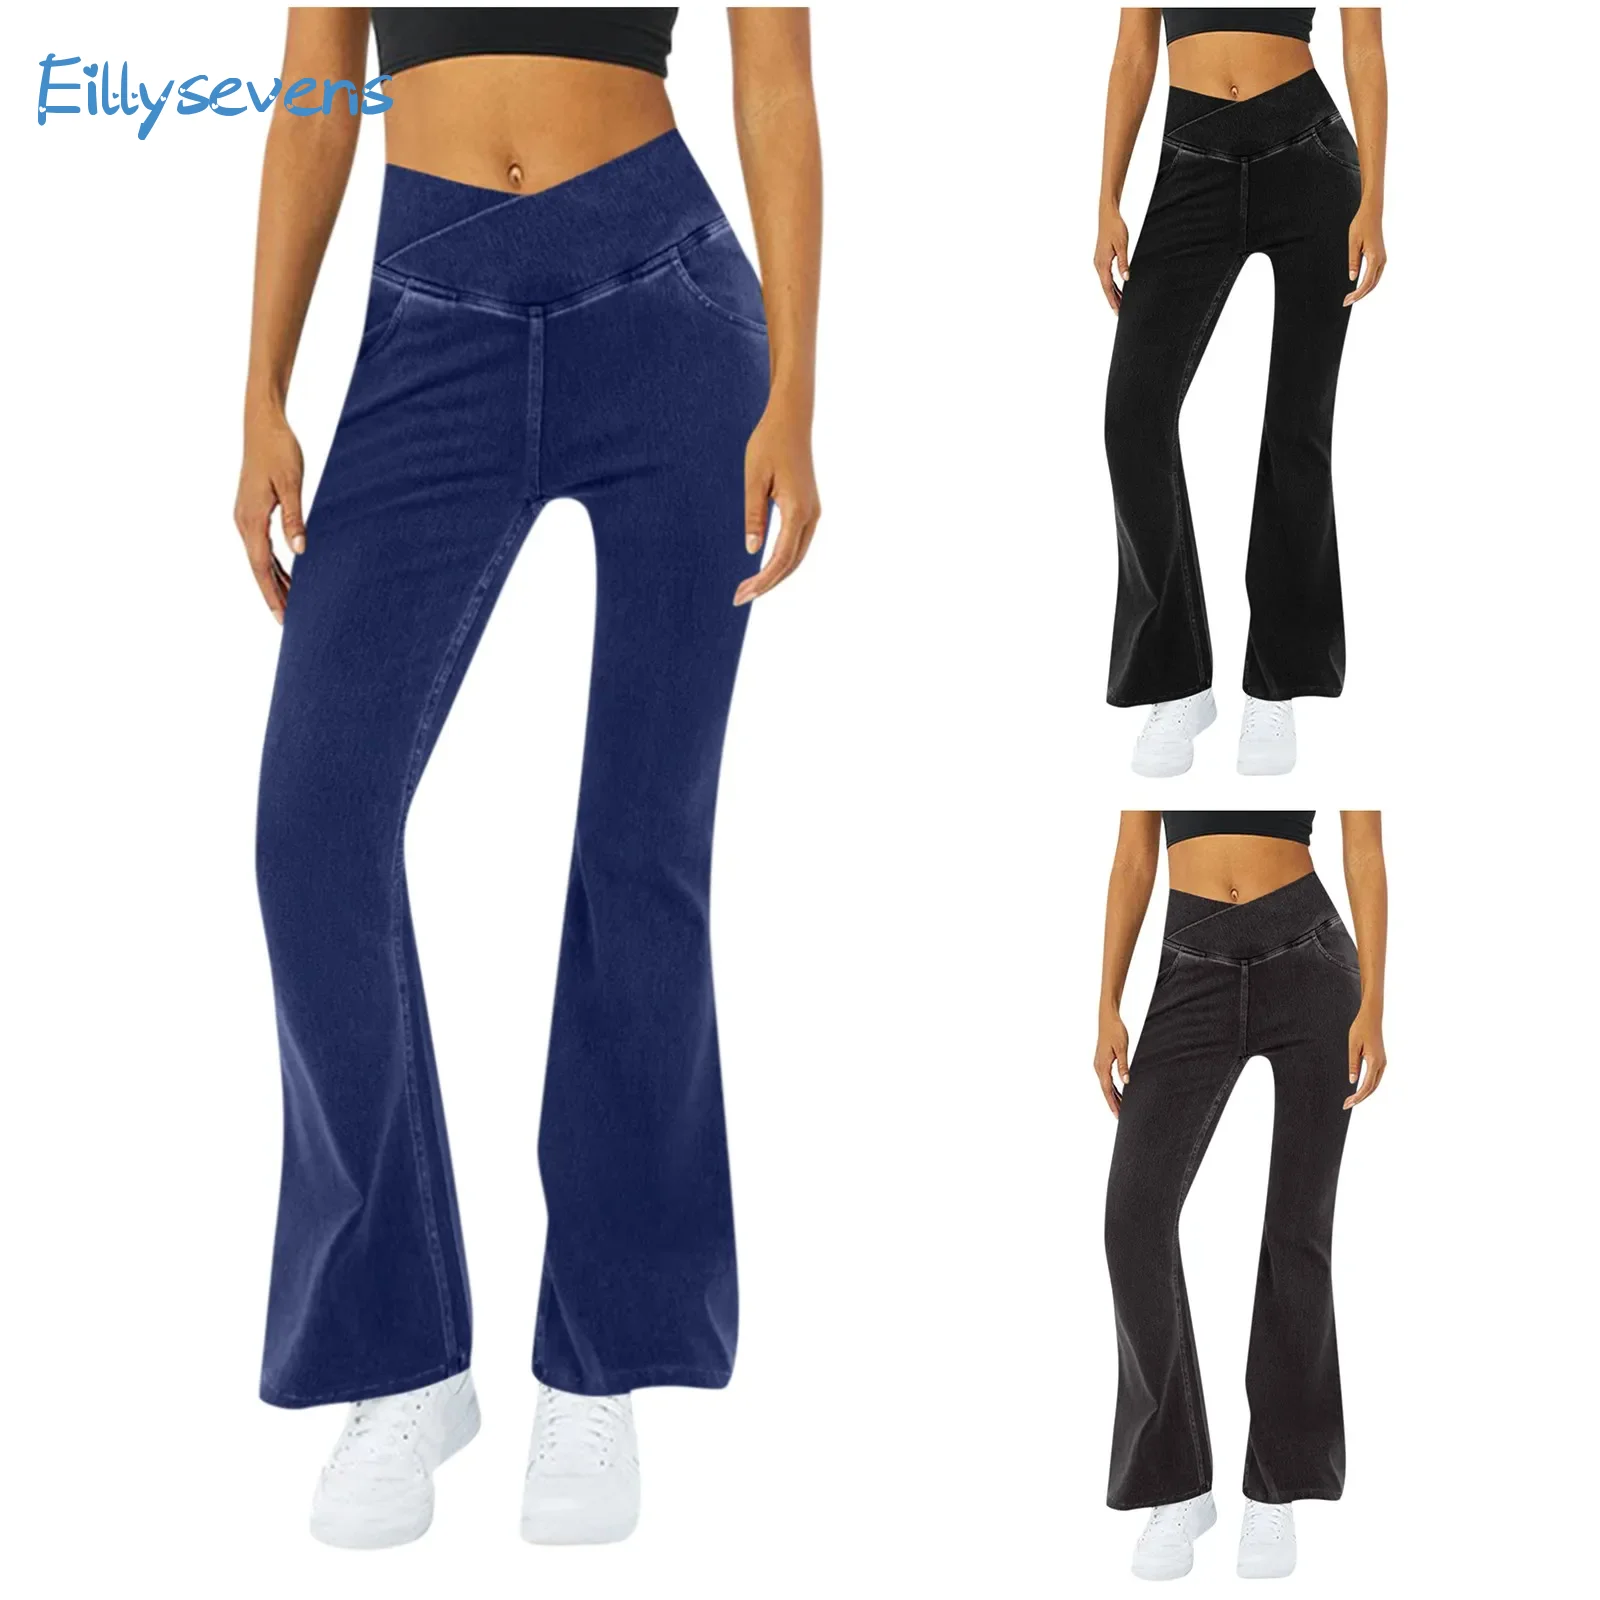 

Women'S Casual Pants Solid Color Yoga Trousers Fashion Cross High Waisted Breathable Washed Stretchy Slim Fit Flare Pants